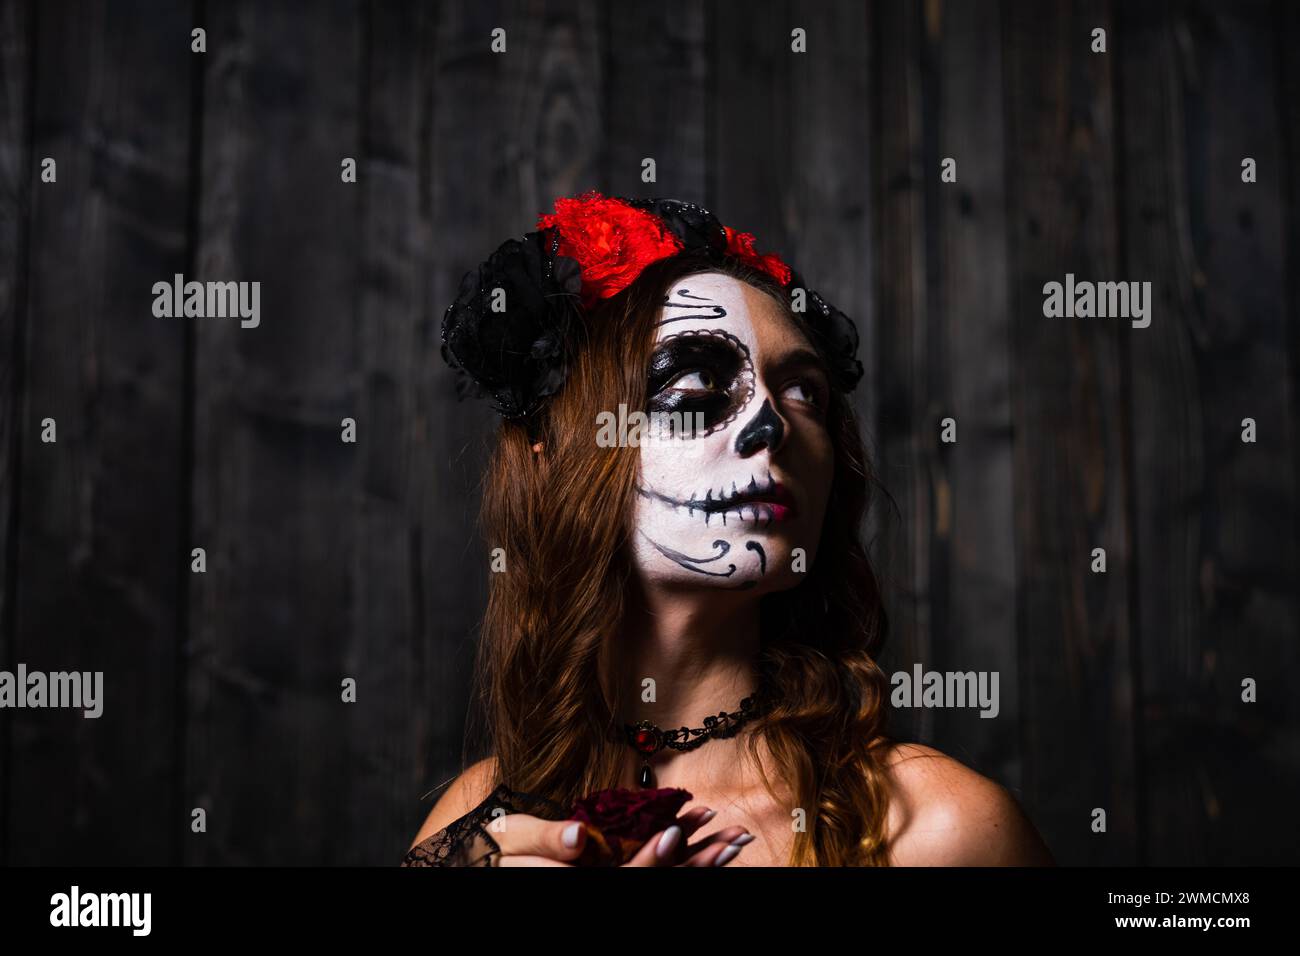 A pensive woman adorned with skull makeup gazes upwards, against a rustic wooden backdrop. Her floral headpiece adds a touch of elegance to the hauntingly beautiful scene. Stock Photo